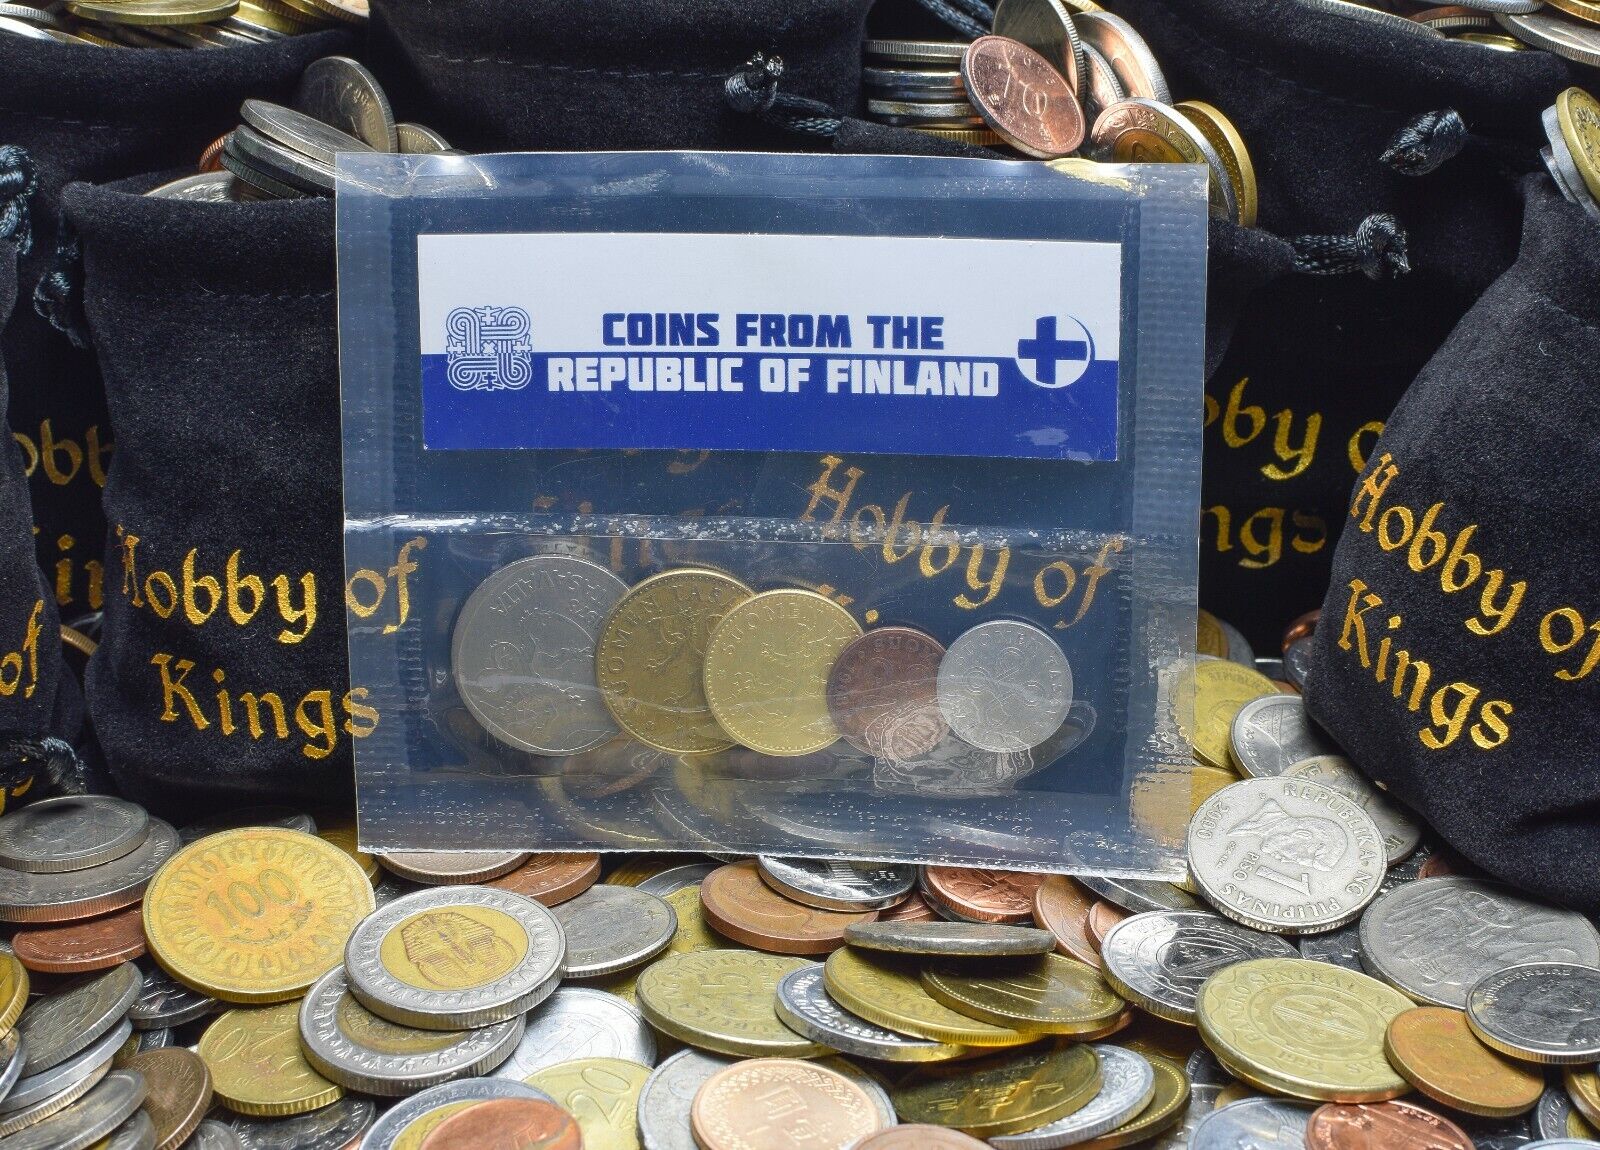 5 FINNISH COINS DIFFERENT EUROPEAN COINS FOREIGN CURRENCY, VALUABLE MONEY Без бренда - фотография #3